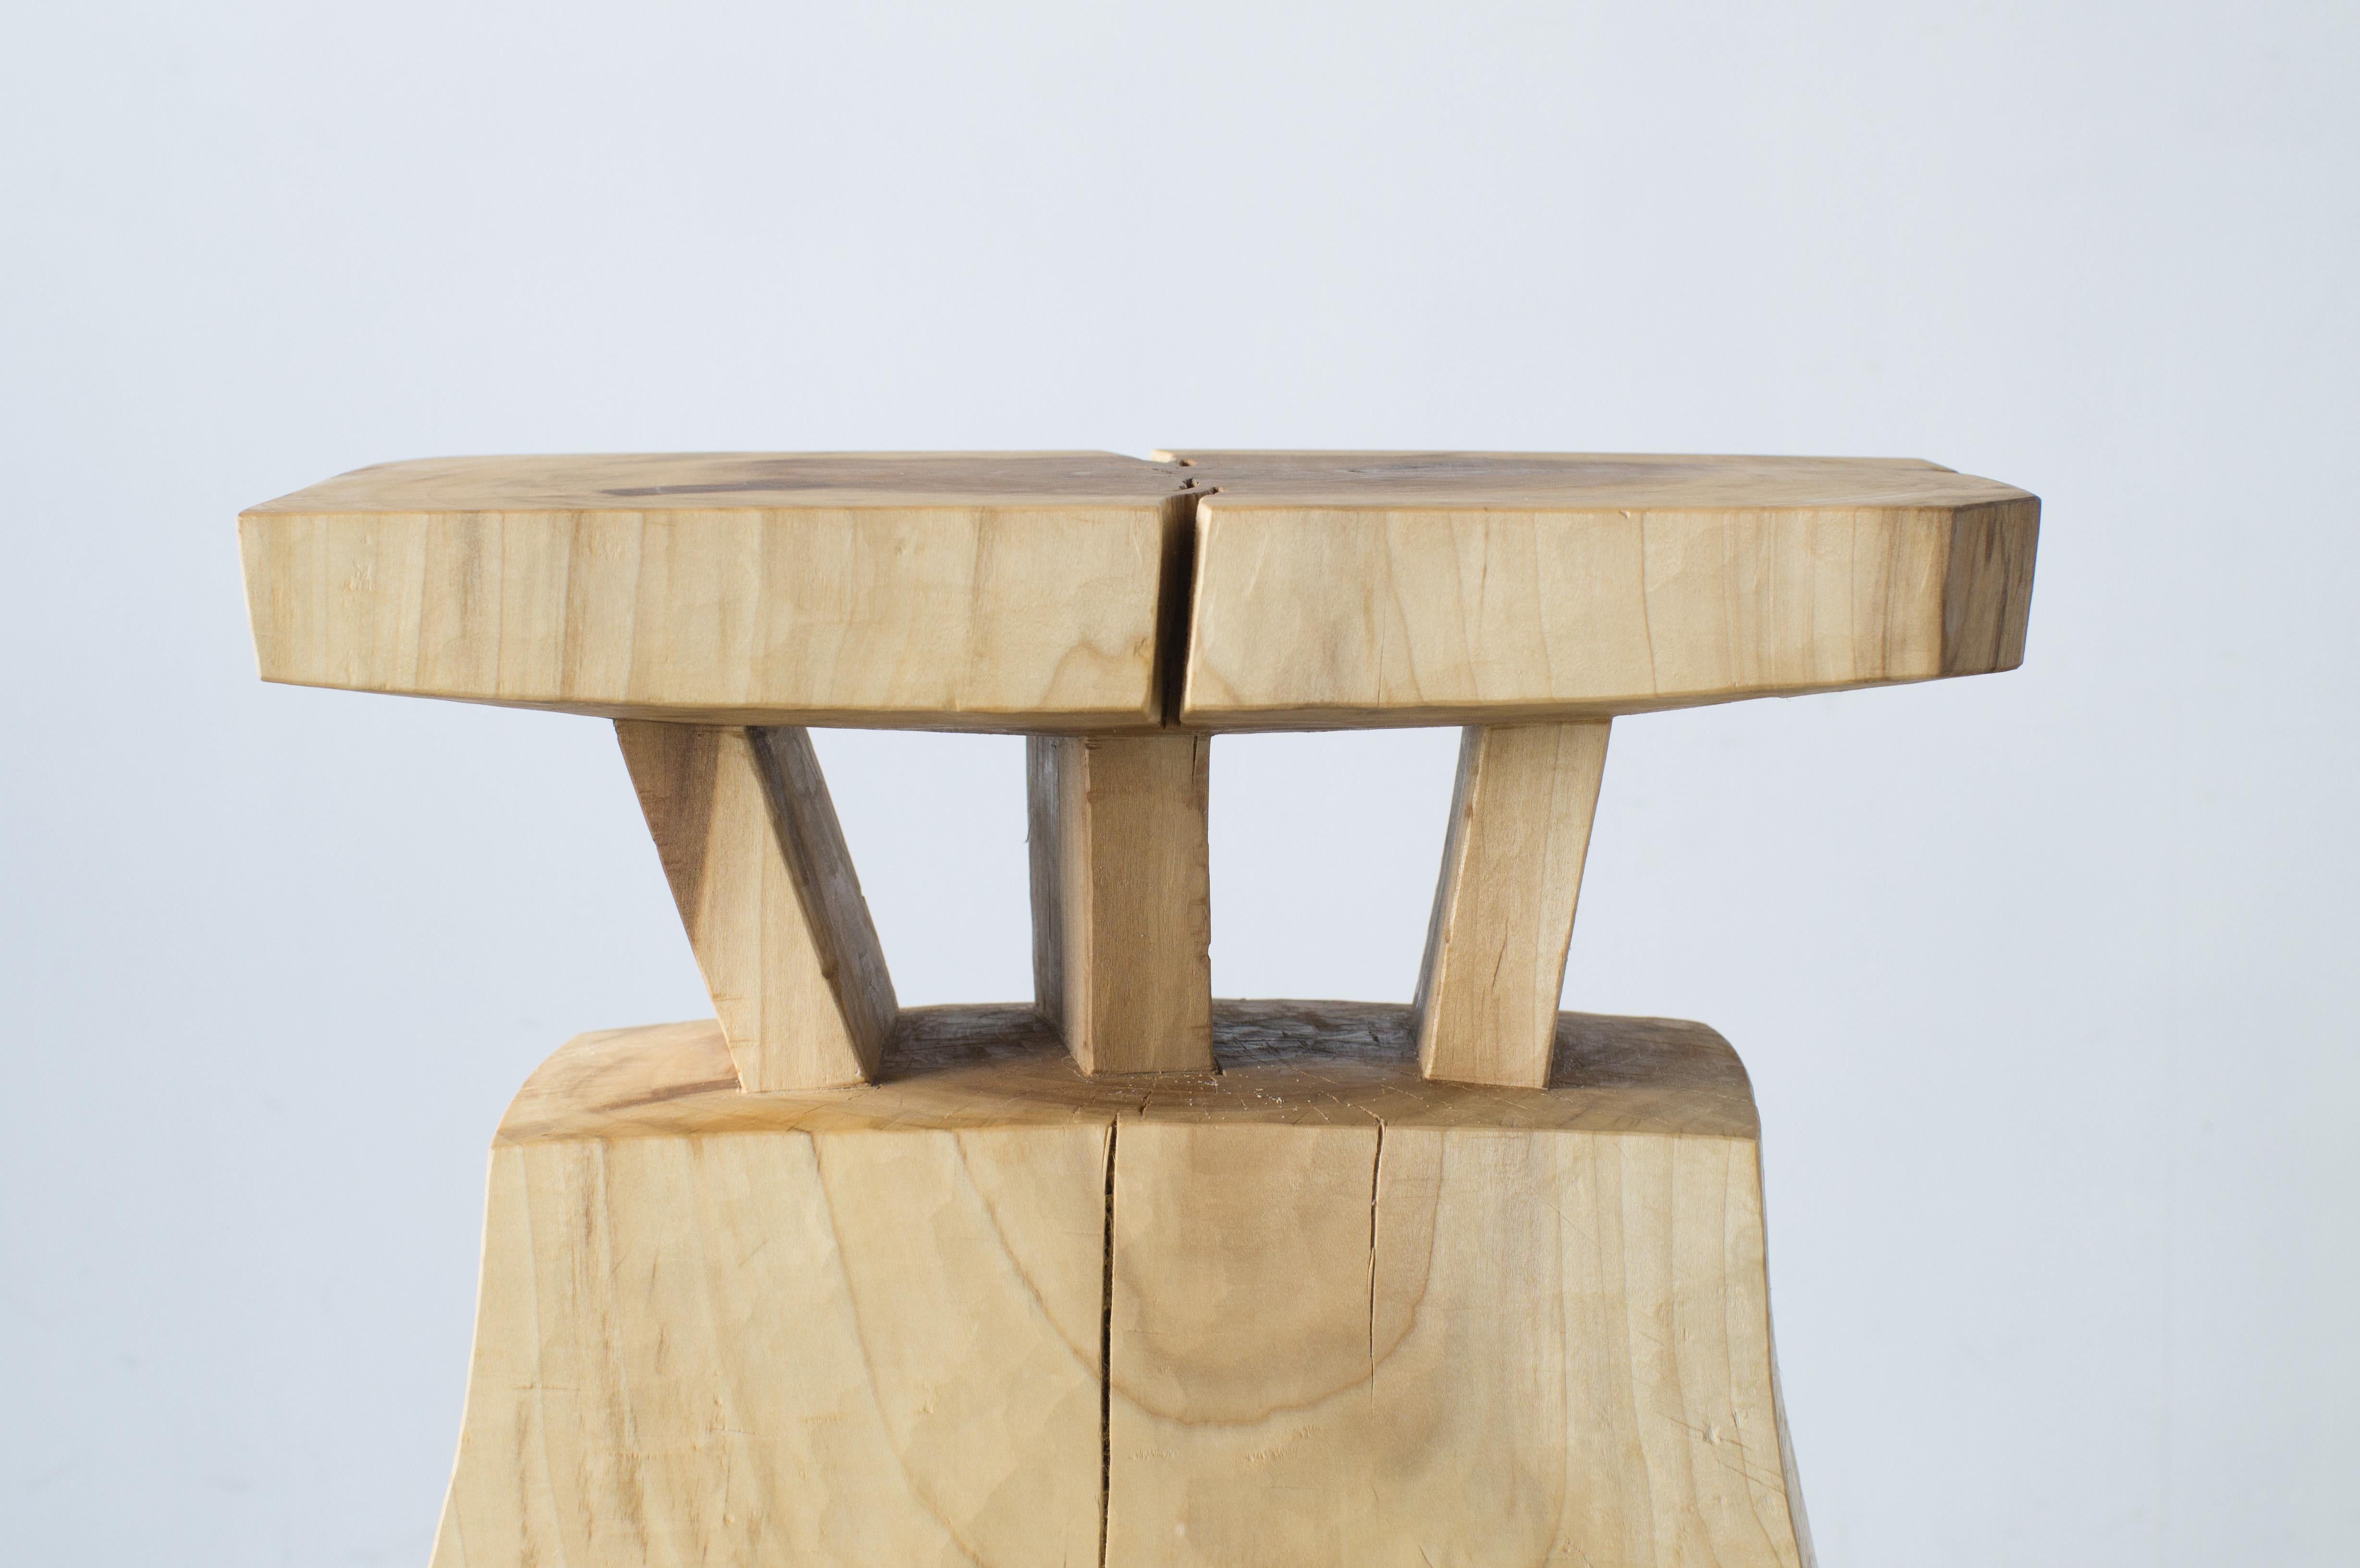 Contemporary Hiroyuki Nishimura and Zogei Furniture Sculptural wood Stool12 Tribal Glamping For Sale